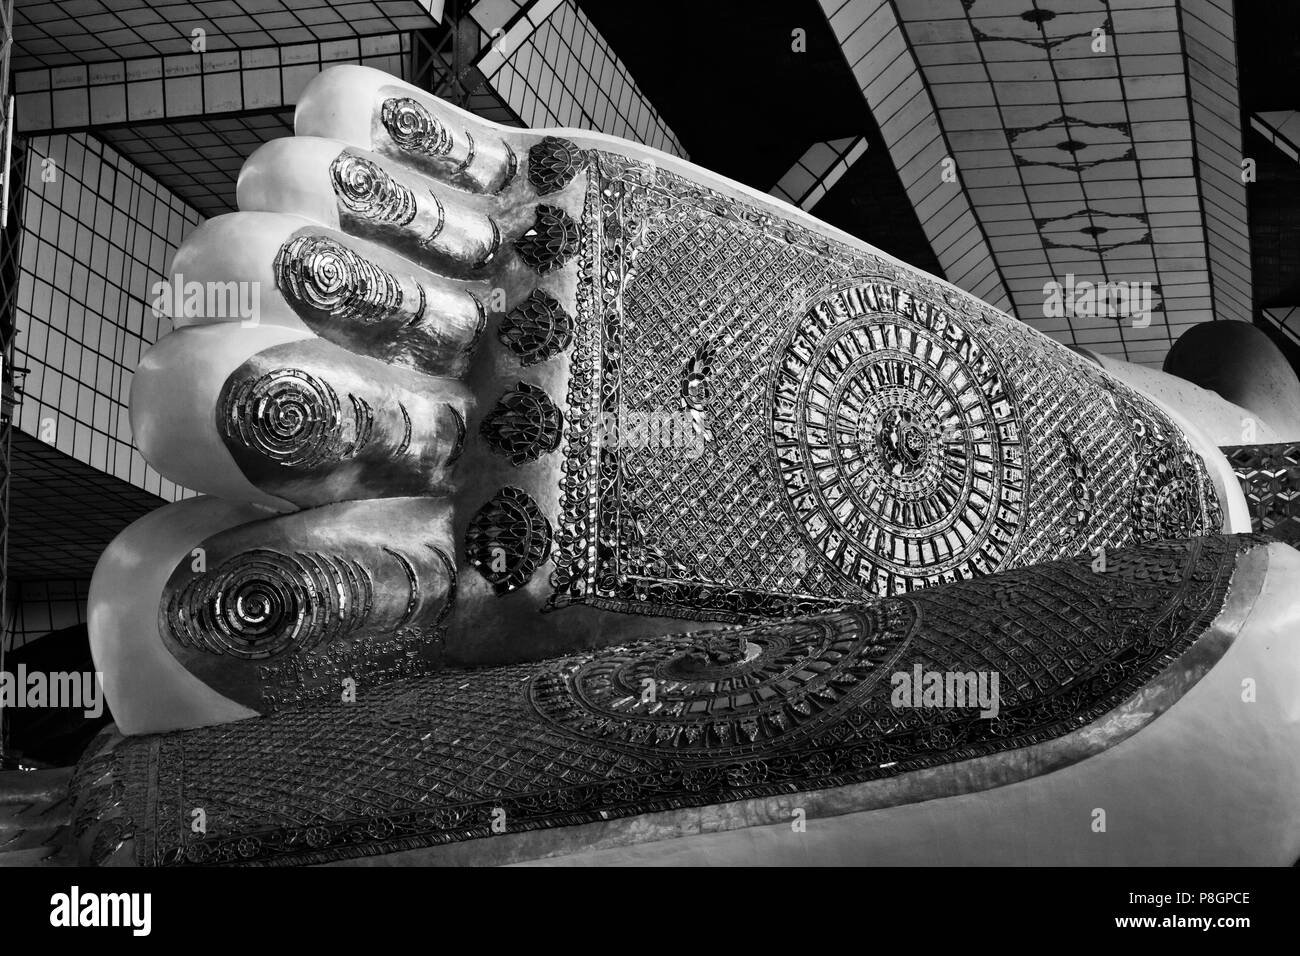 The decorated foot of the GIGANTIC SHWETHALYAUNG BUDDHA STATUE which is 55 meters long - BAGO MANMAR Stock Photo